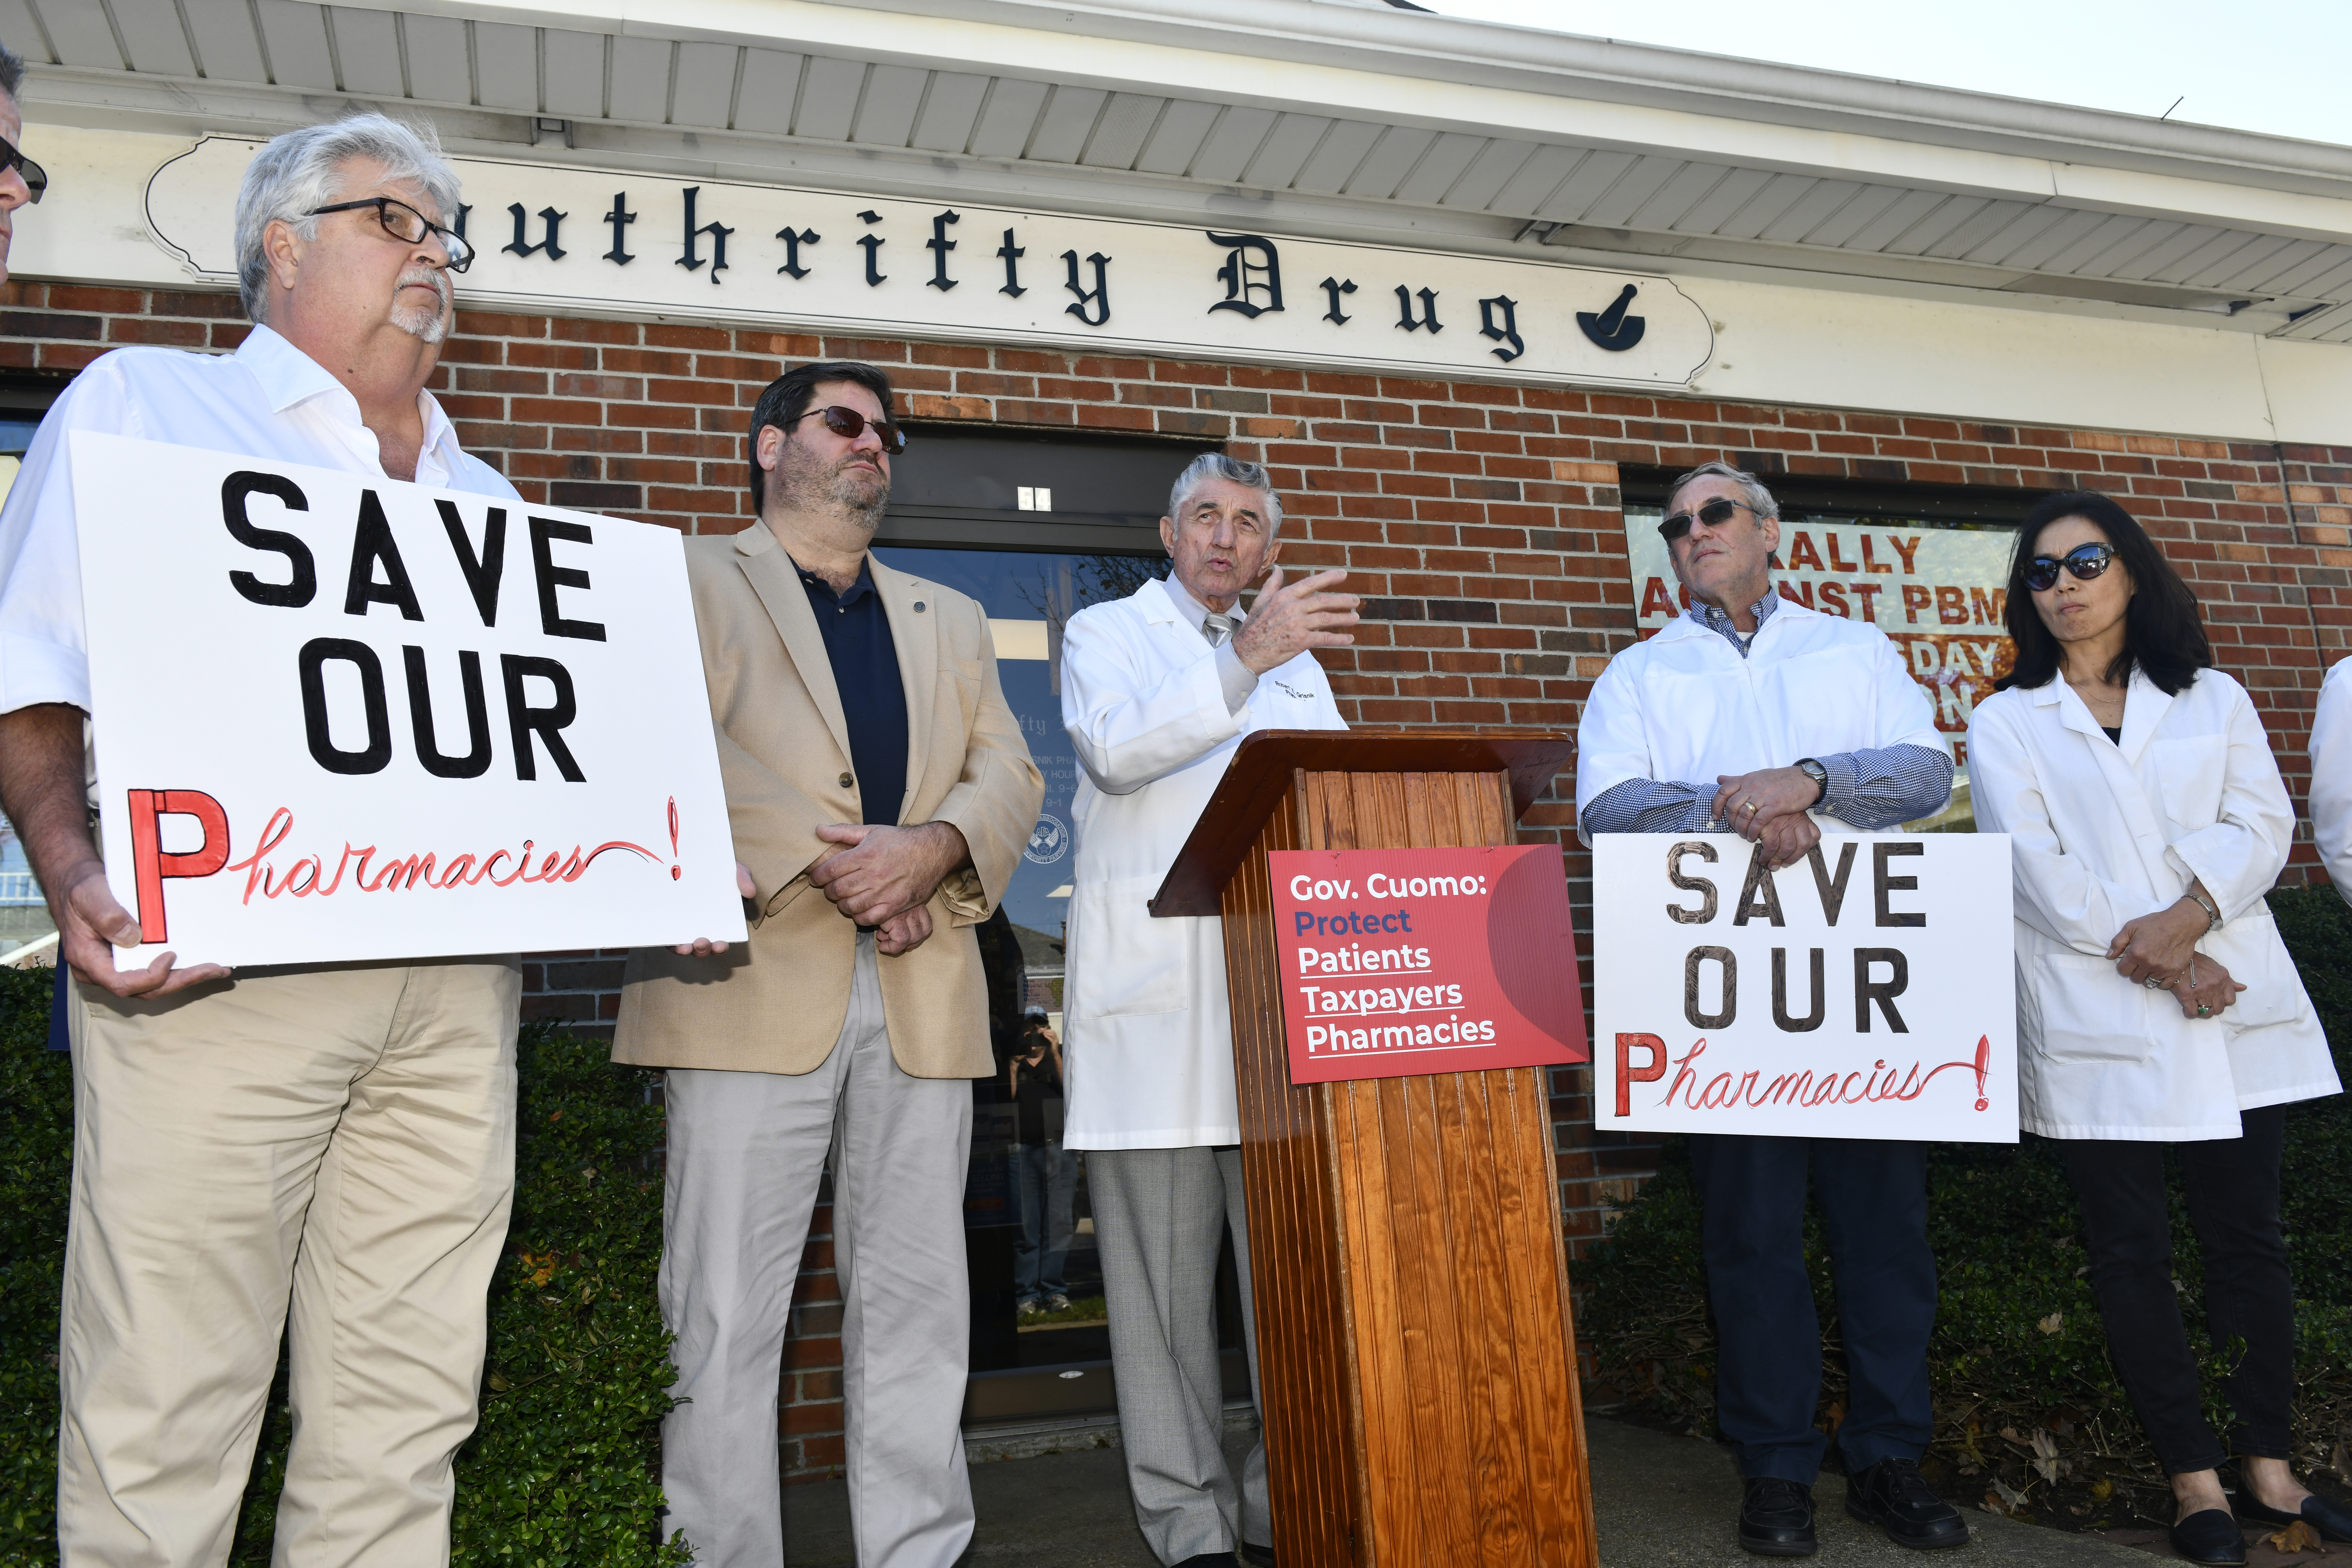 Pharmacist Robert Grisnik of Southrifty Drugs speaks out against PBMs in front of his store on Wednesday, October 23. DANA SHAW